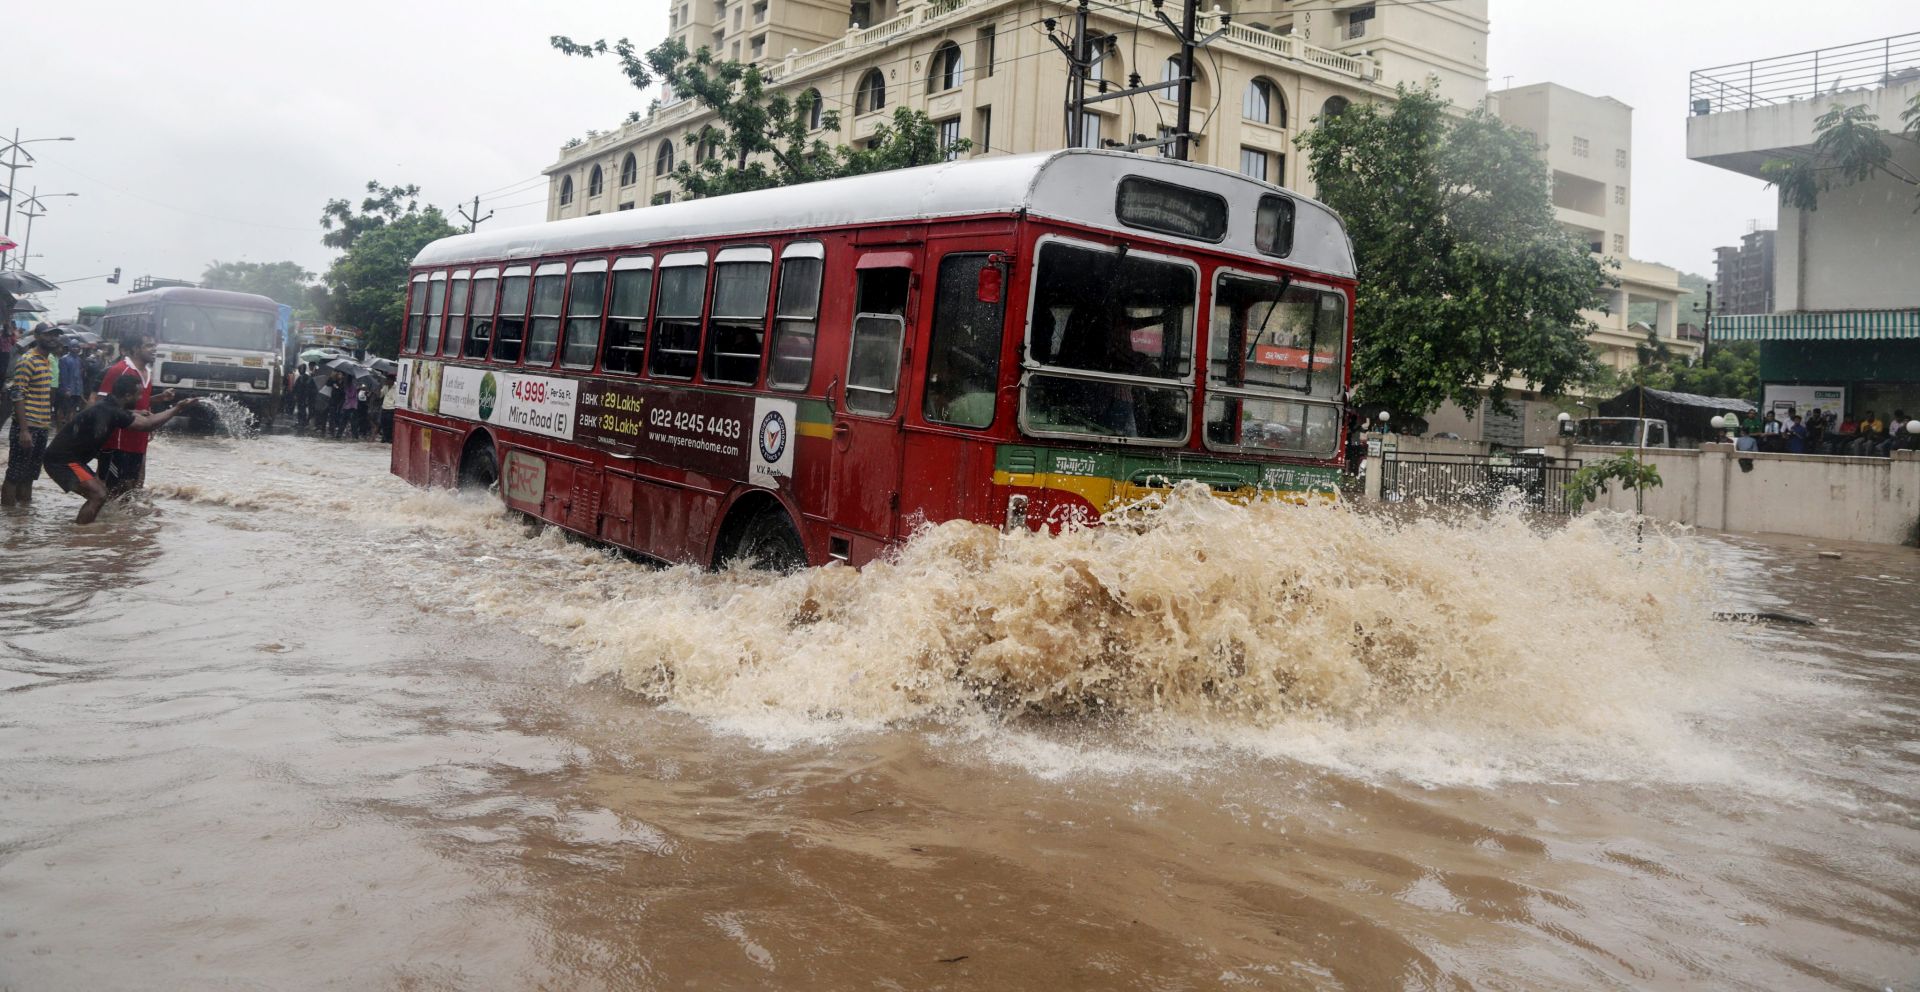 epa05450042 A public bus pass through a water logged area in Ghodbunder on the outskirts of Mumbai, India, 31 July 2016. According to reports heavy rain continued to lash the city and adjoining areas, impacting movement of suburban trains and vehicular traffic and flooding several areas of the city.  EPA/DIVYAKANT SOLANKI